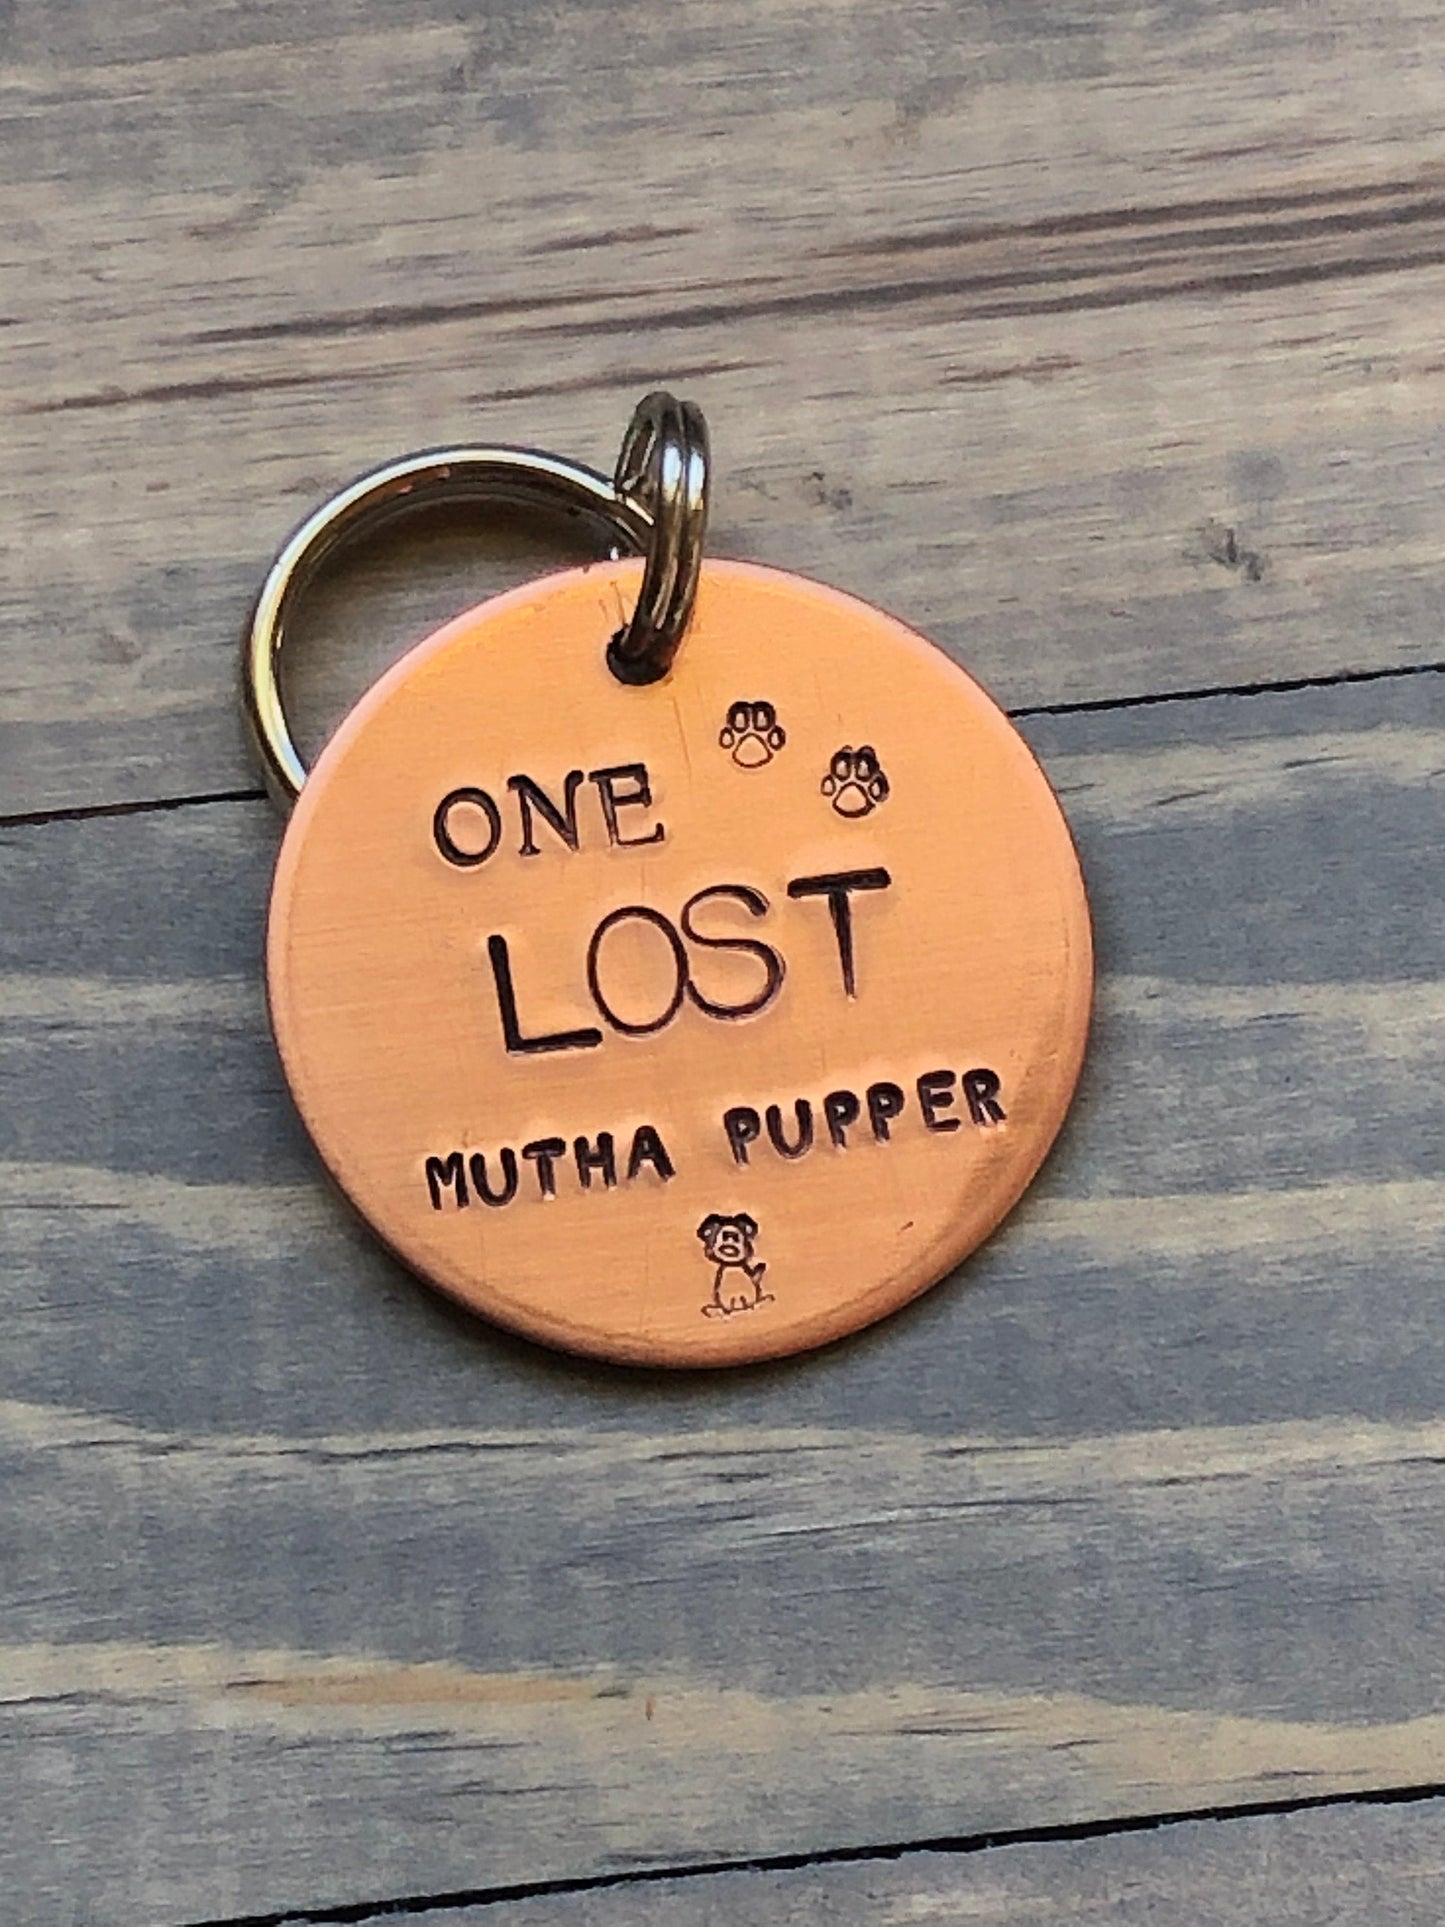 Funny Dog Tag, Hand Stamped Pet ID, One Lost Mutha Pupper, Personalized Dog Tag for Dog, Lost AF Dog